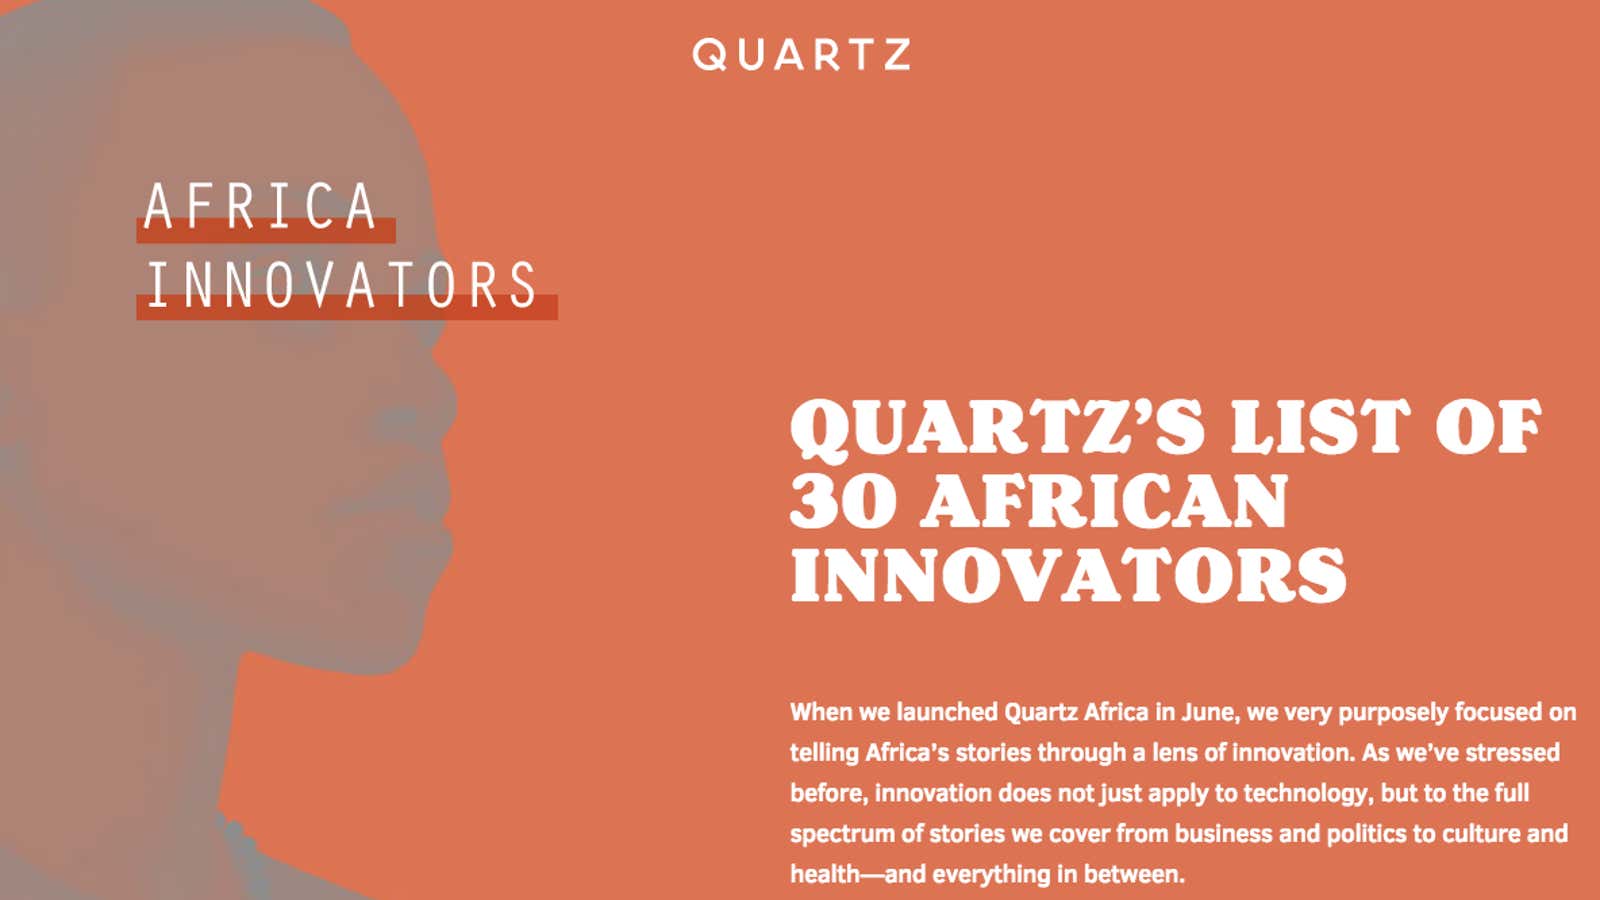 Quartz Africa Summit in Nairobi: A forum on the innovators transforming the continent